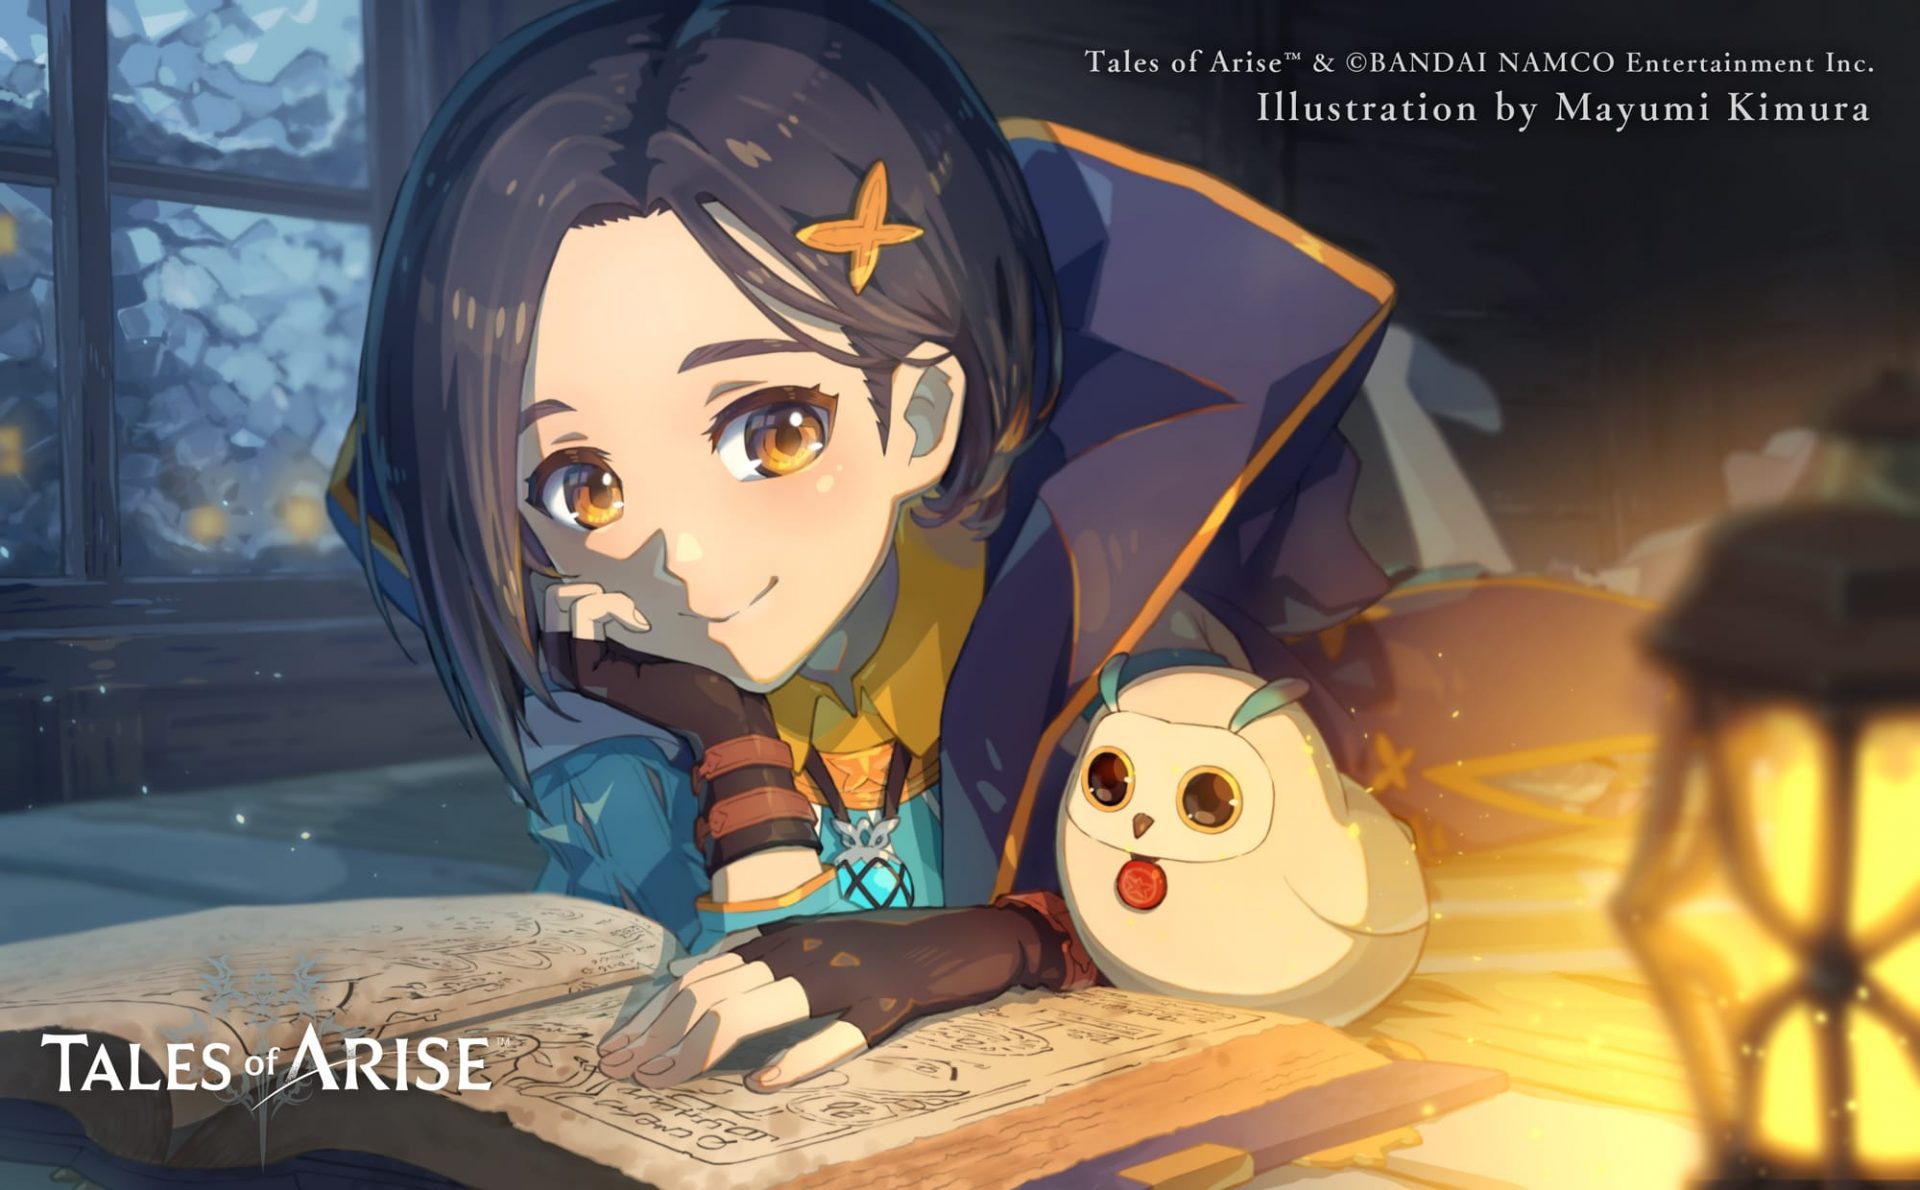 Code Vein Concept Artist Mayumi Kimura Shares Celebratory Tales of Arise Launch Artwork Featuring Rinwell and Hootle